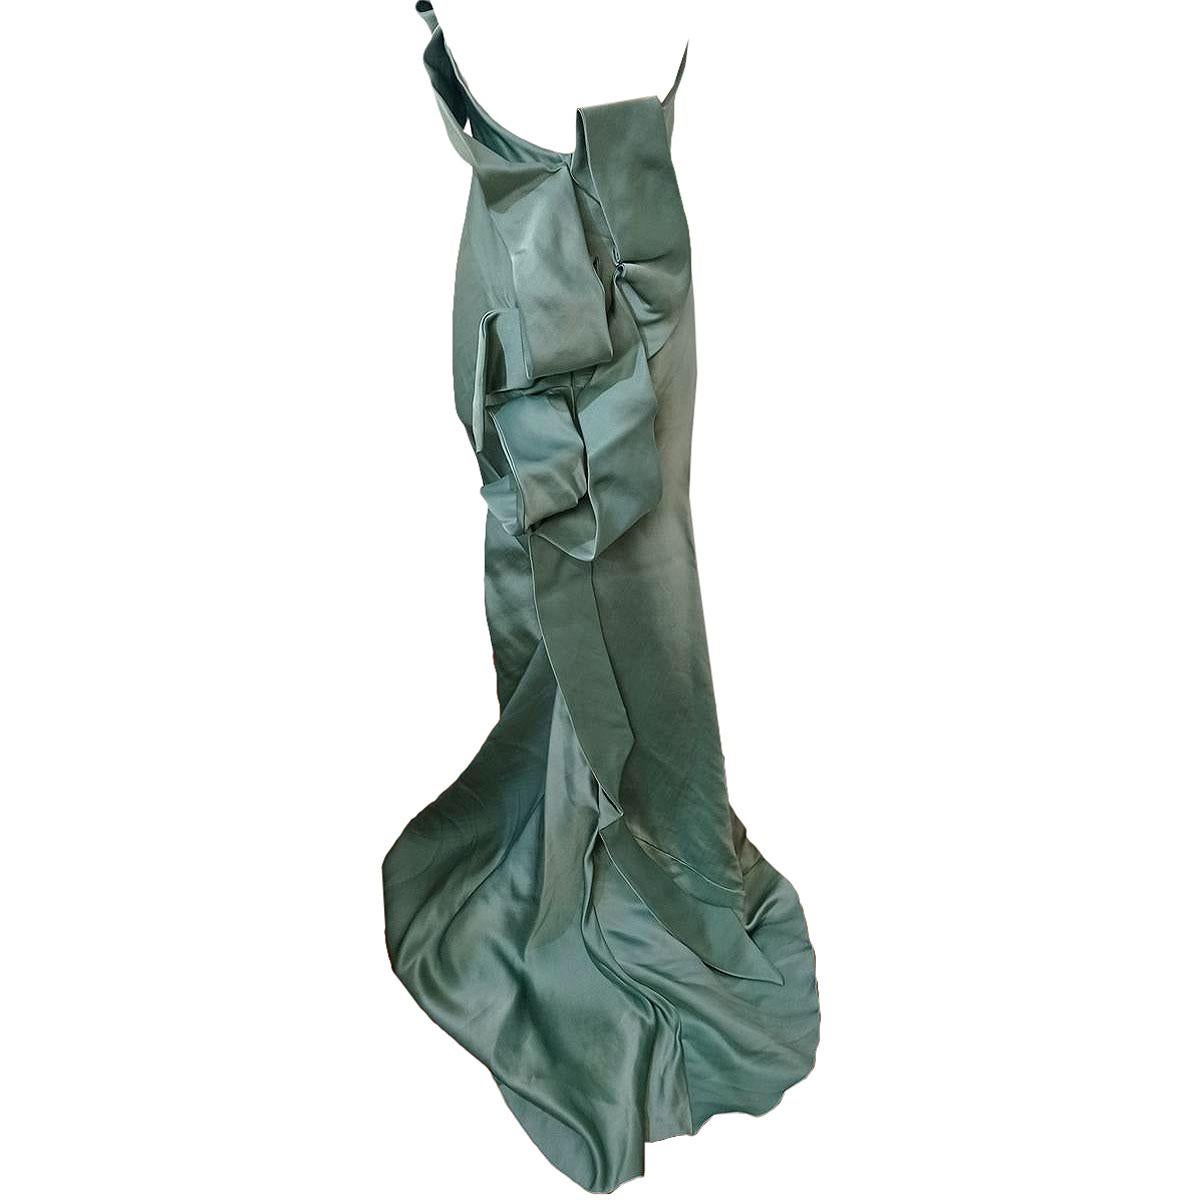 Wonderful long dress by Ermanno Scervino 
Gala dress
Amazing long gala dress
100% Silk
Aqua green color
Beautiful bow (back and front)
Maximum length cm 145 (front) and cm 185 (back) 
Worldwide express shipping included in the price !